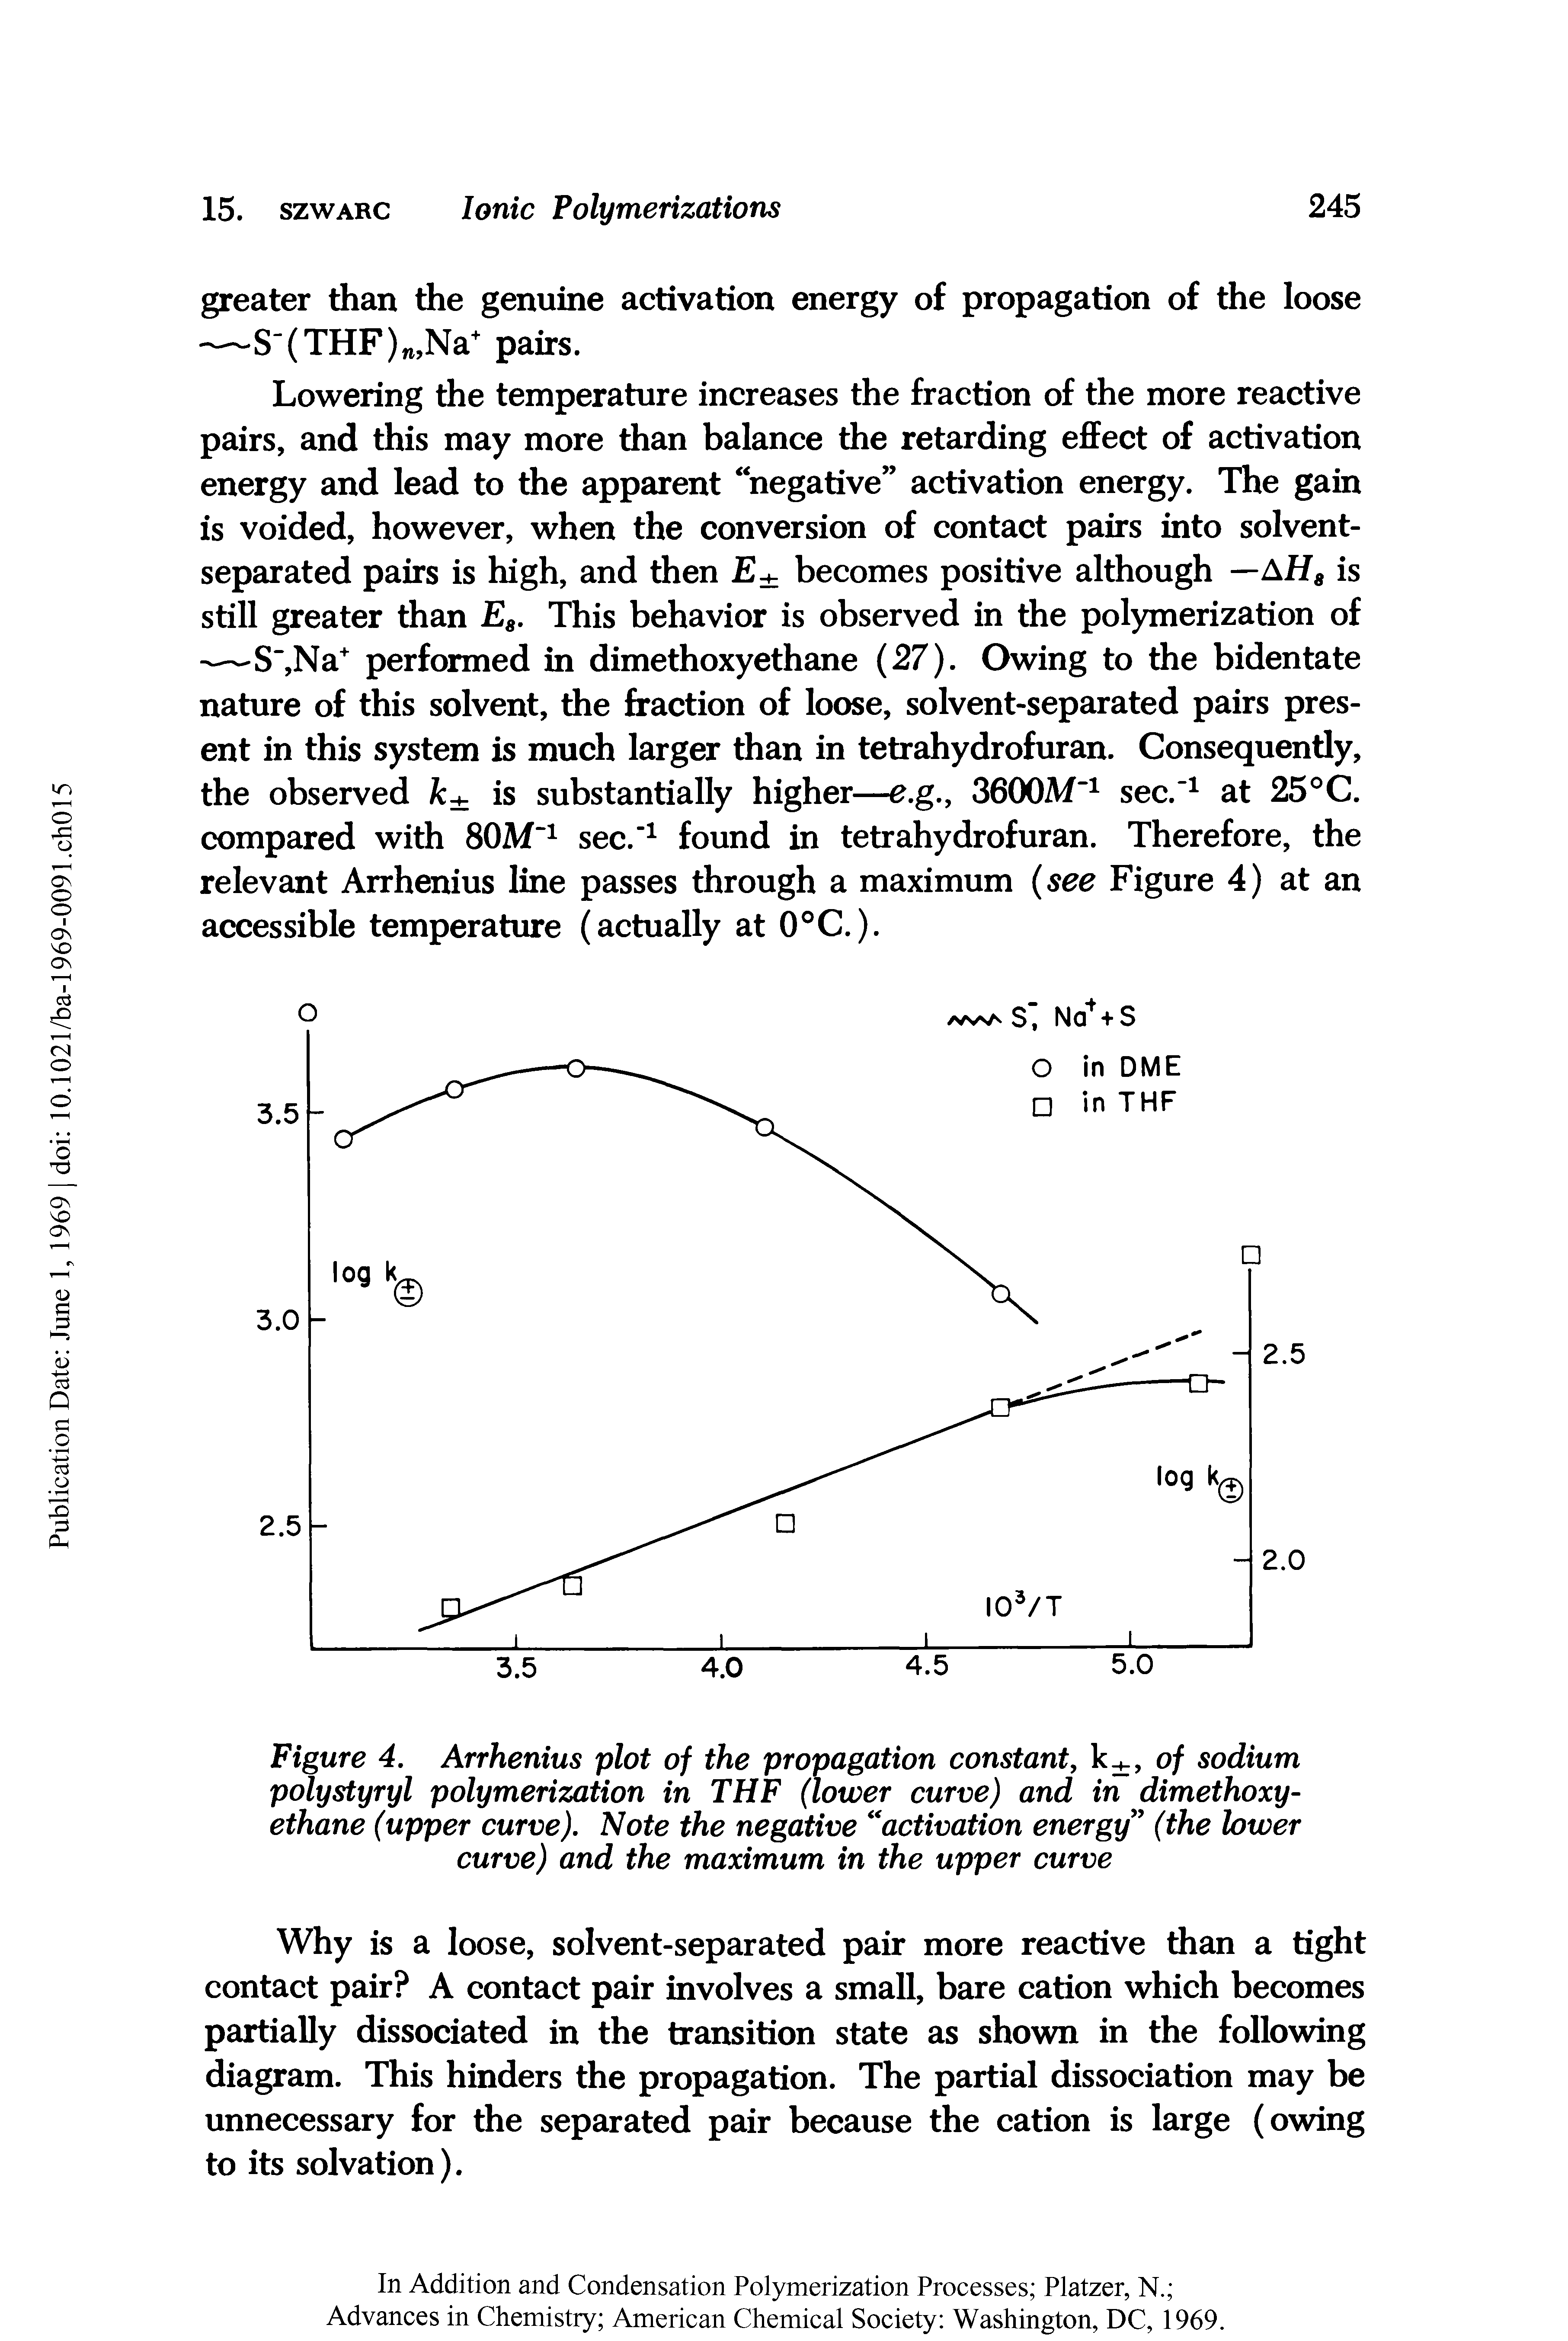 Figure 4. Arrhenius plot of the propagation constant, k , of sodium polystyryl polymerization in THF (lower curve) and in dimethoxyethane (upper curve). Note the negative activation energy (the lower curve) and the maximum in the upper curve...